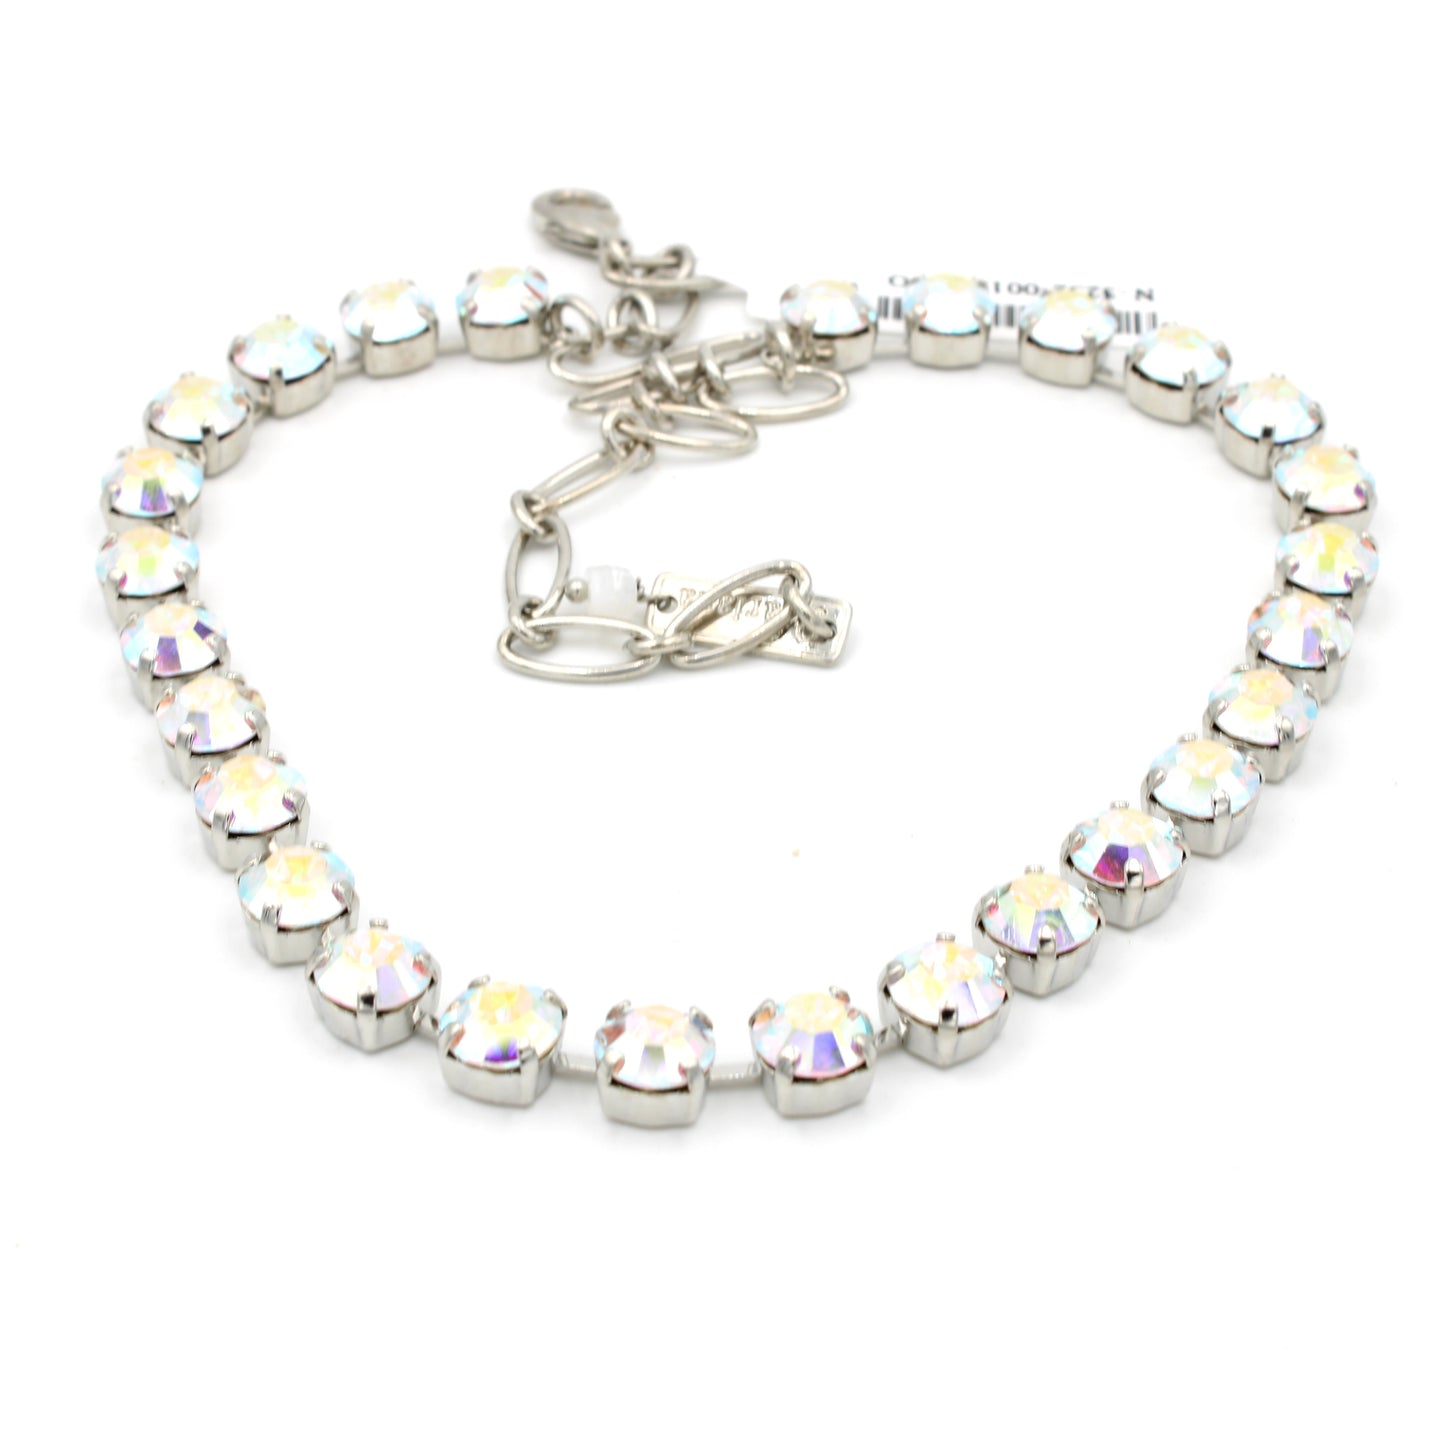 Crystal AB Super Sparkly Must Have Everyday Necklace